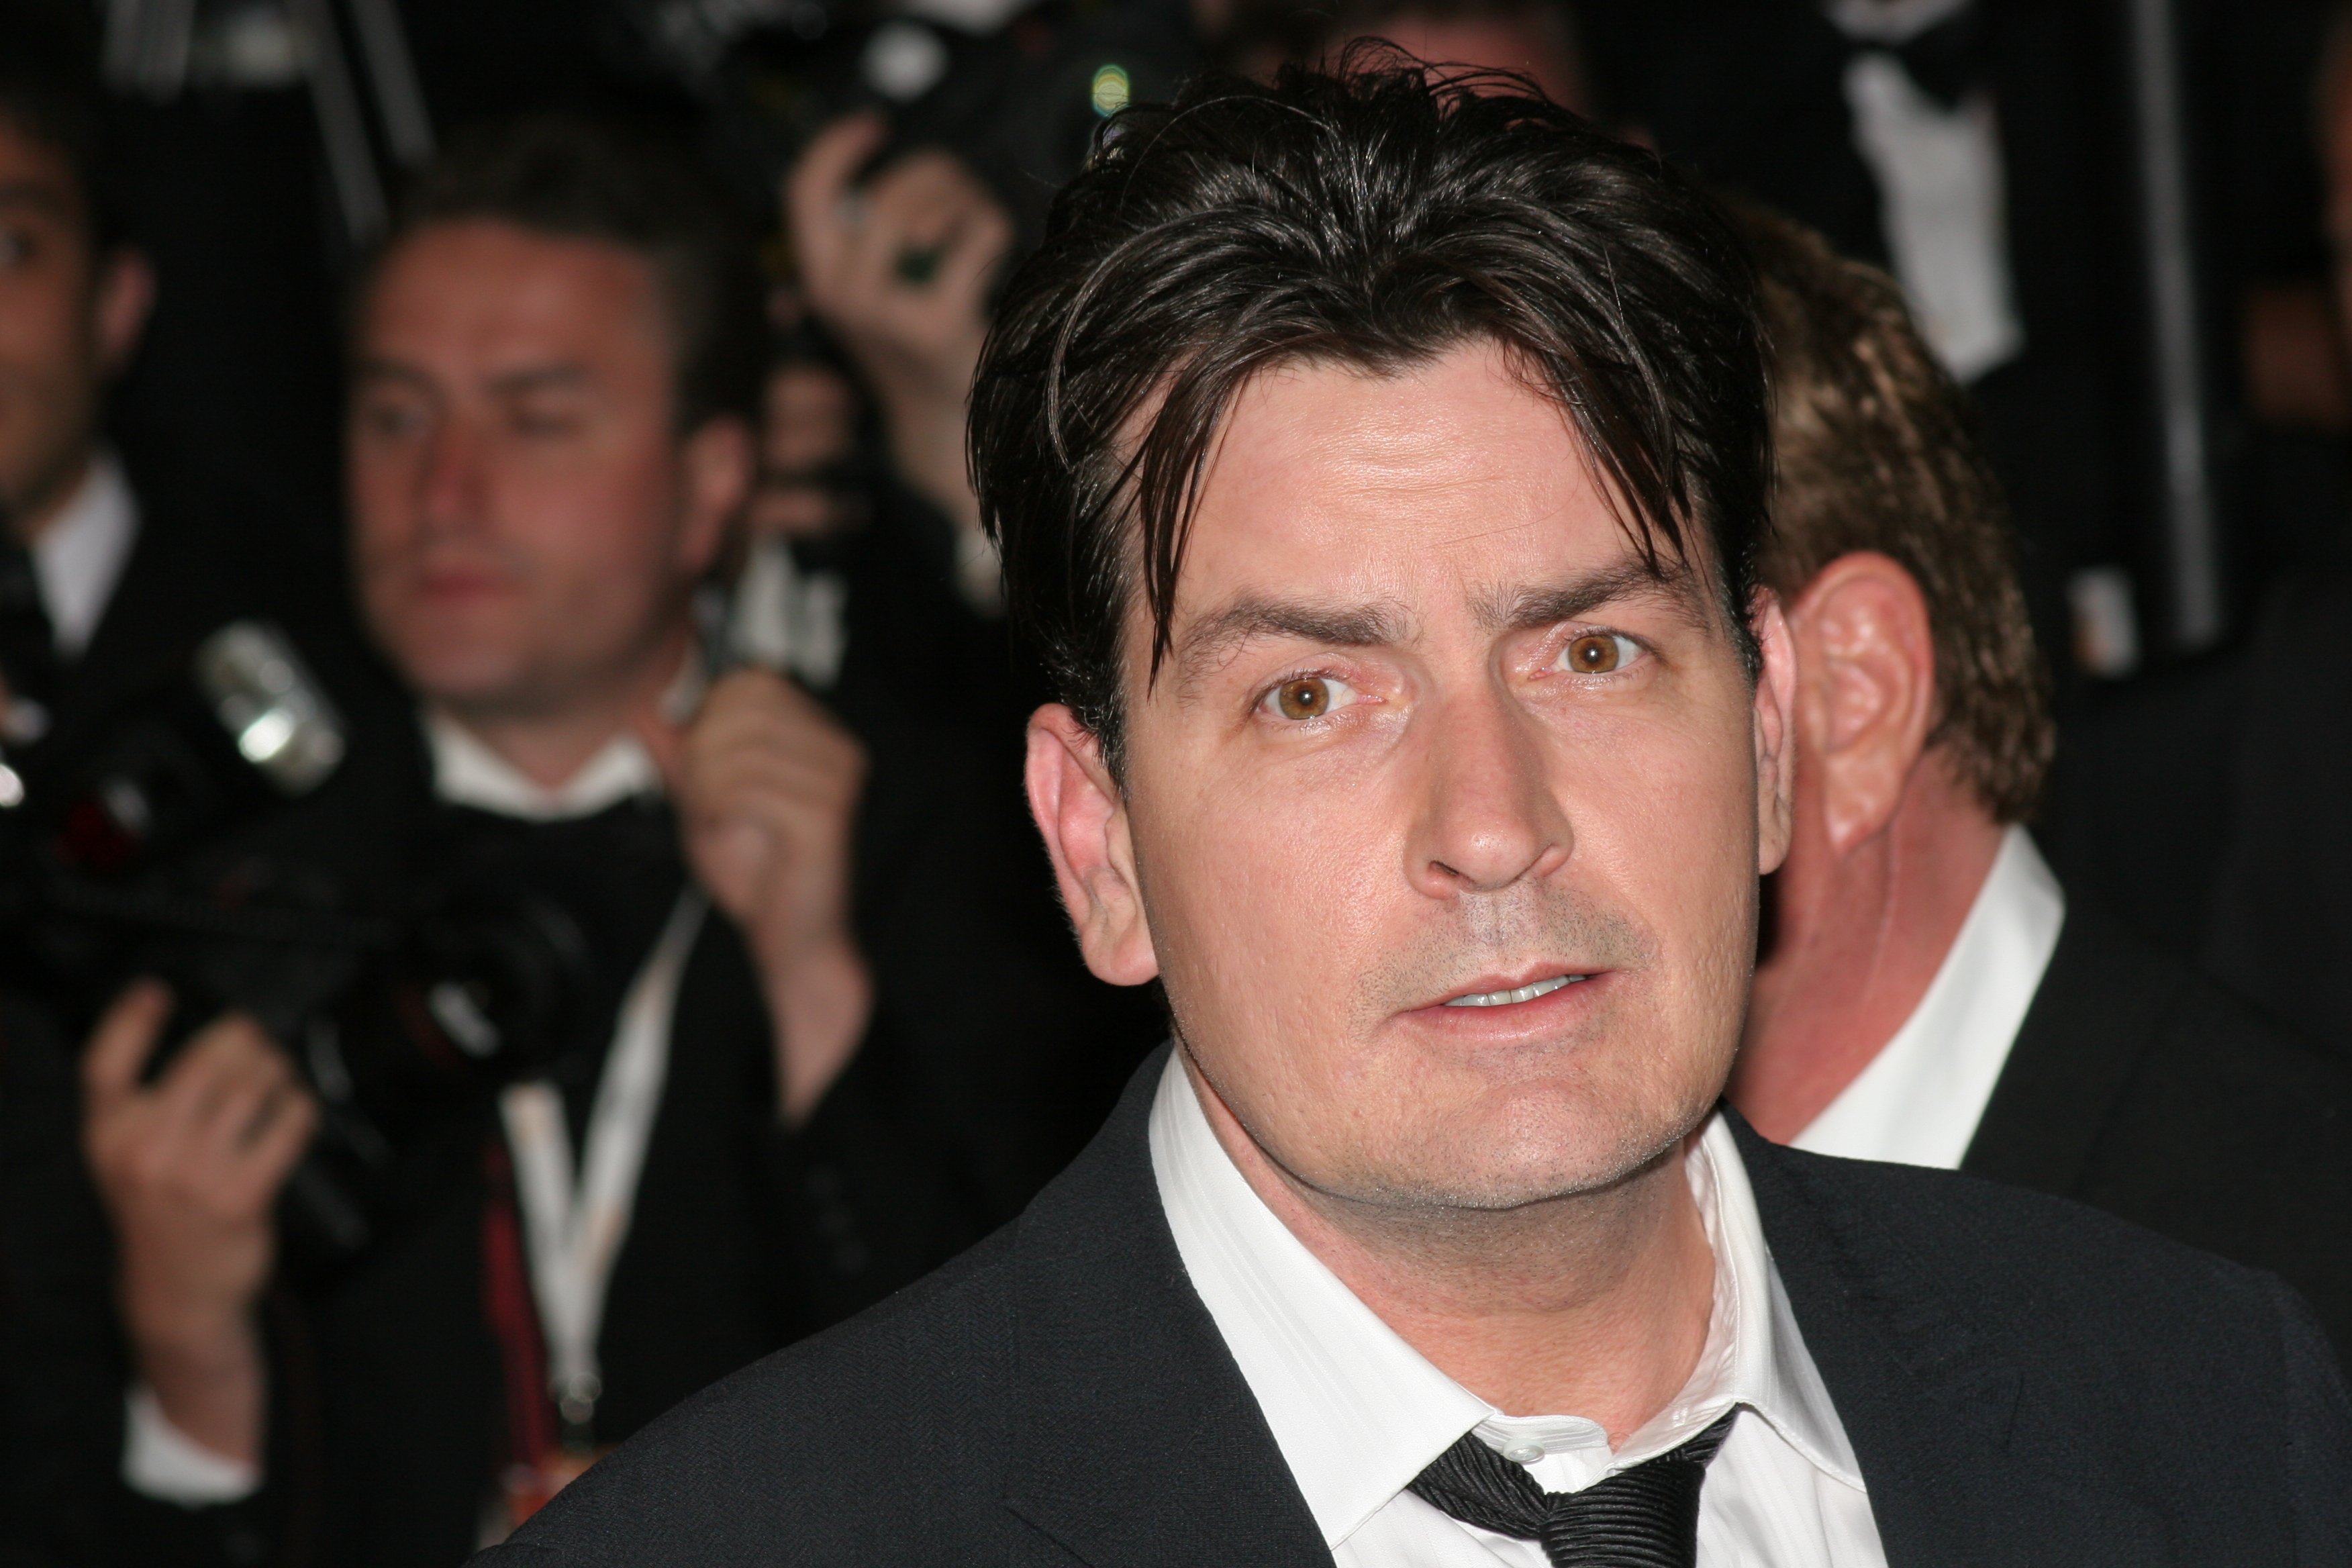 Charlie Sheen attends the 'Platoon' Screening at the Palais during the 59th International Cannes Film Festival May 21, 2006 in Cannes, France. | Photo: Shutterstock